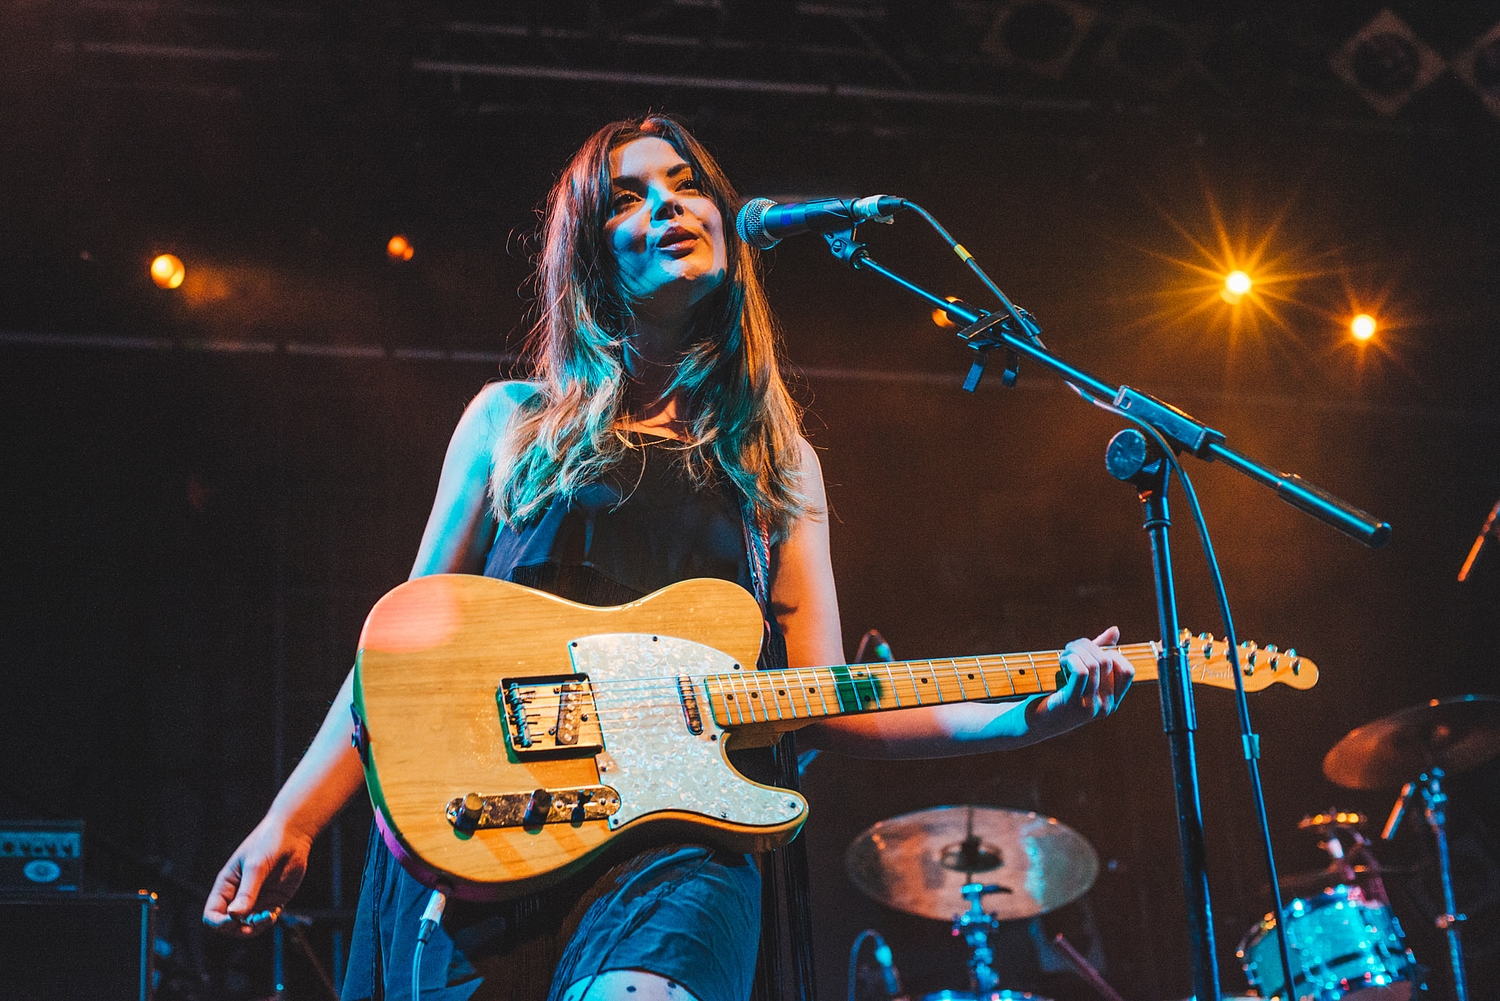 Honeyblood: “I've had my eyes opened a little bit more"